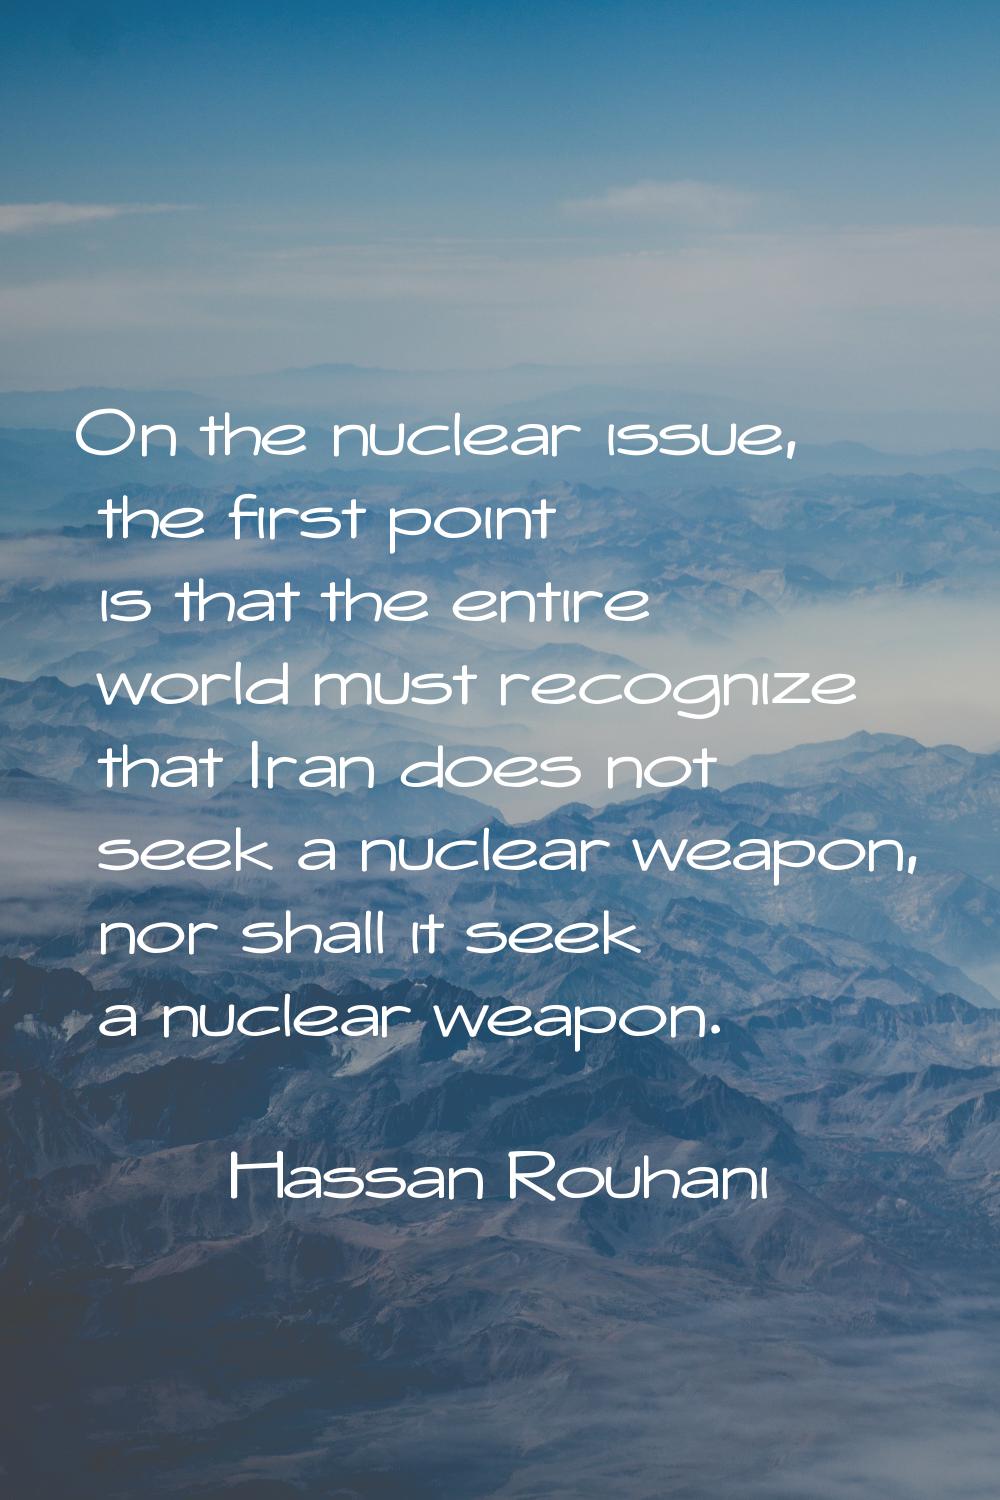 On the nuclear issue, the first point is that the entire world must recognize that Iran does not se